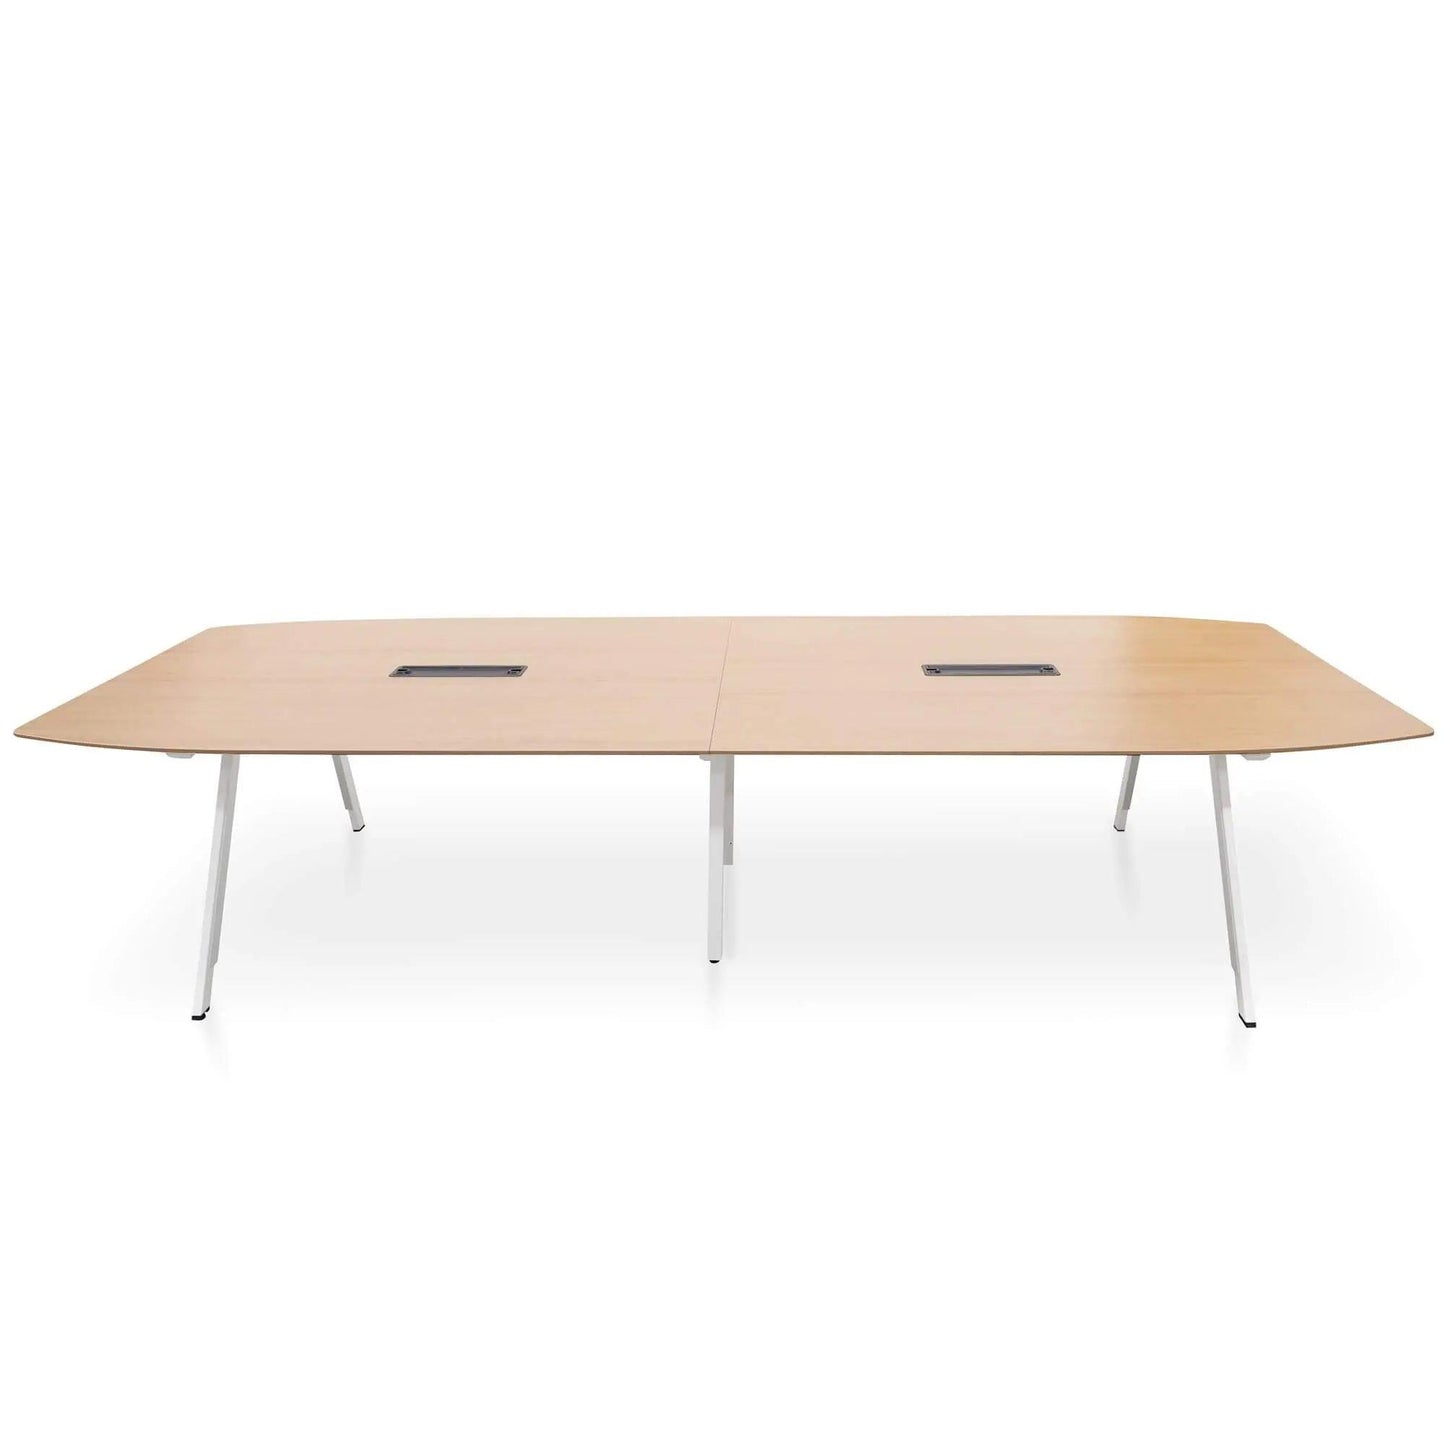 Calibre Boardroom Meeting Table - Natural OT2500-SN - Office DesksOT2500-SN 2